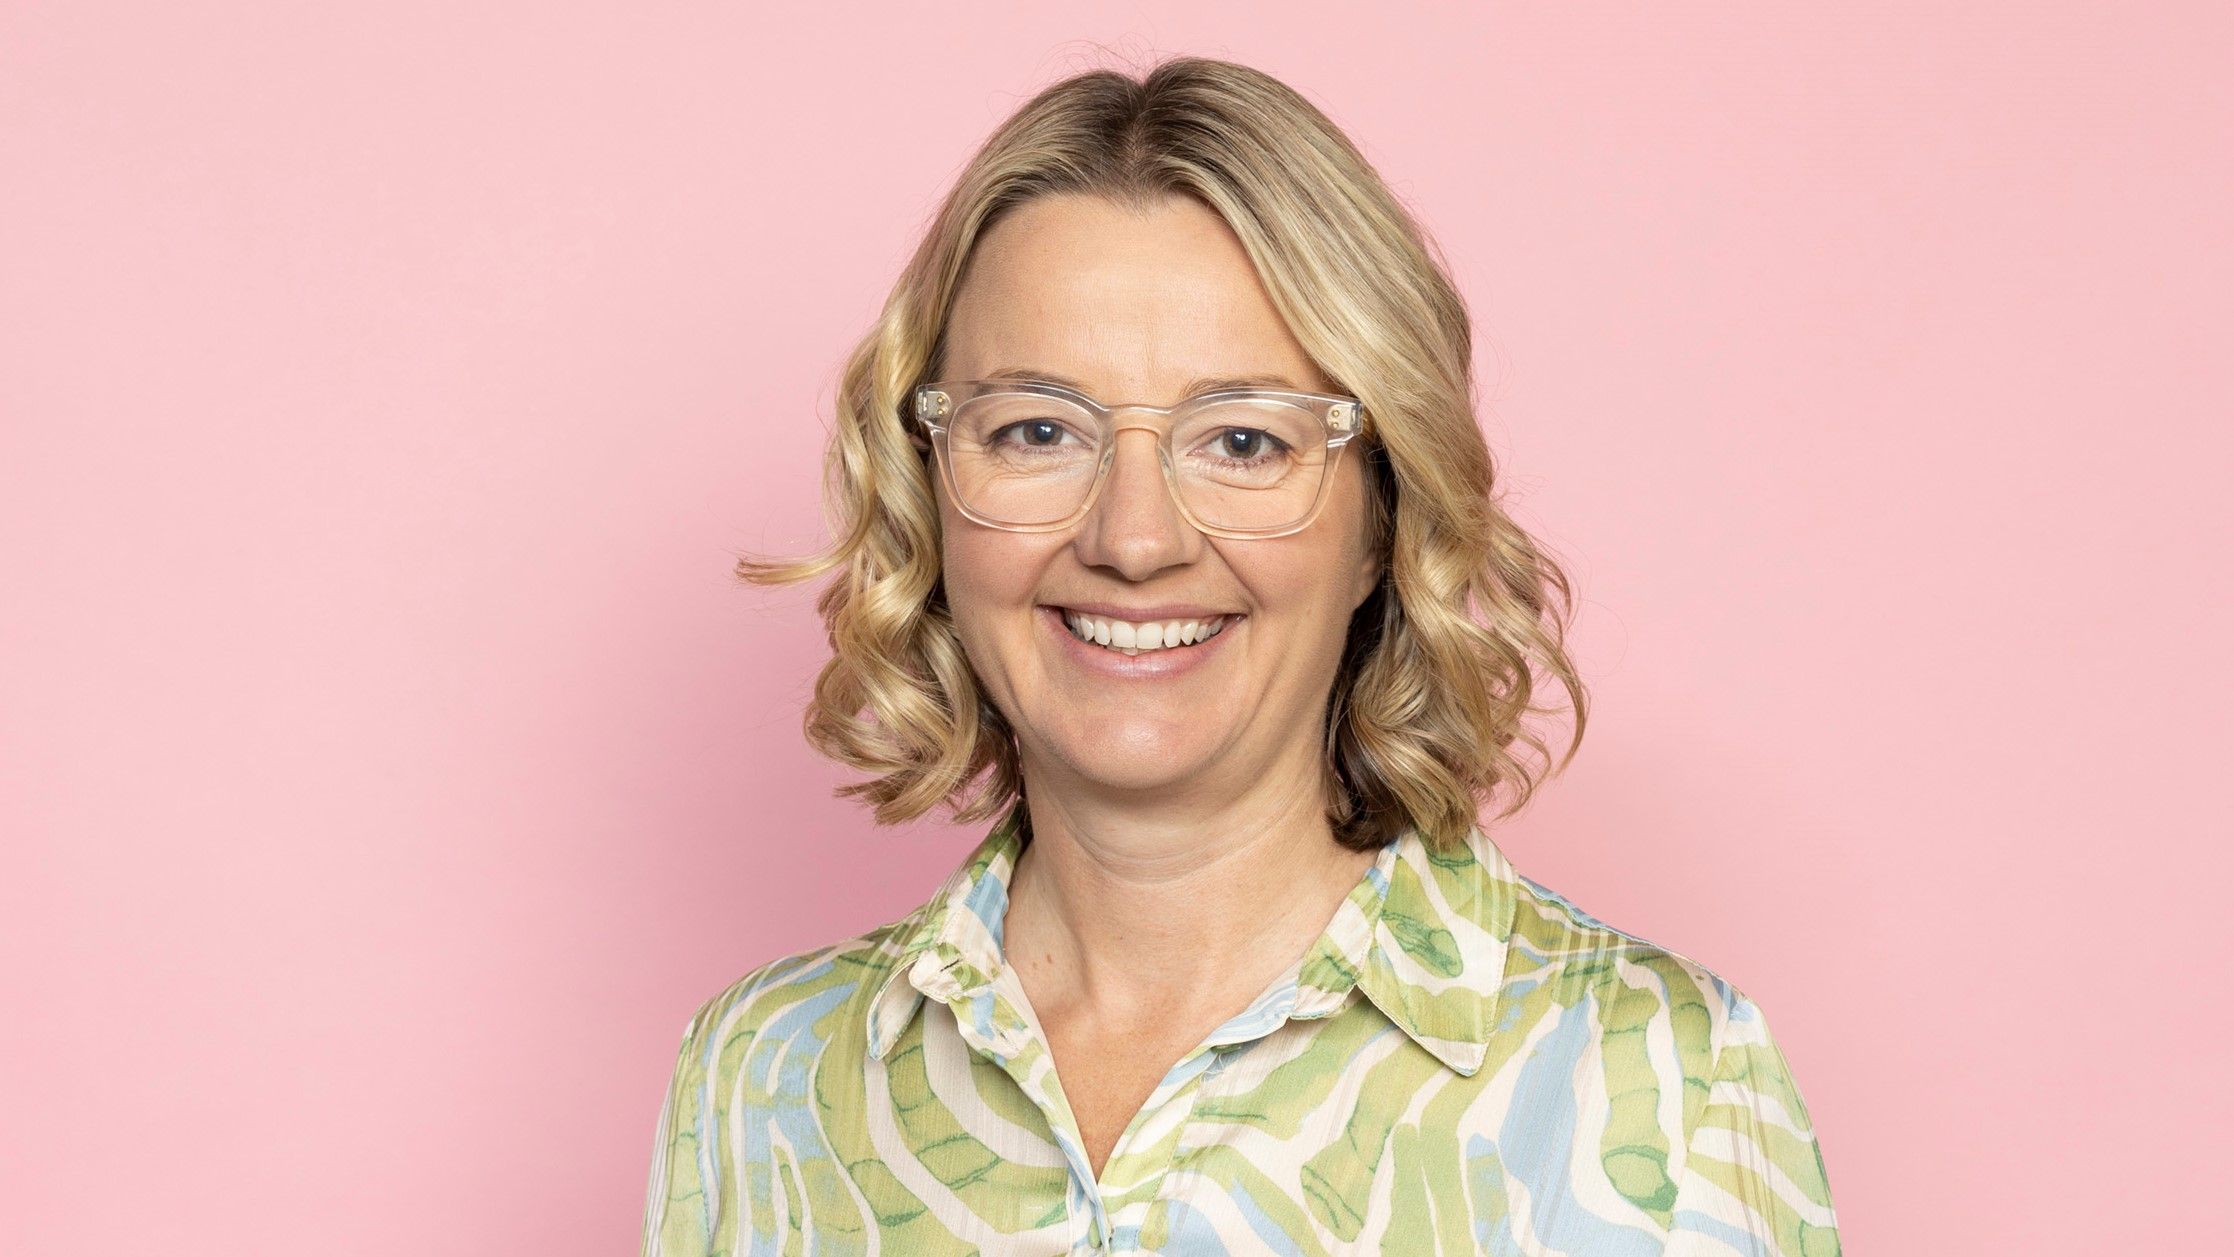 Jen Sharpe wears a pastel green and blue printed dress and clear-framed glasses. She stands smiling in front of a pale pink backdrop